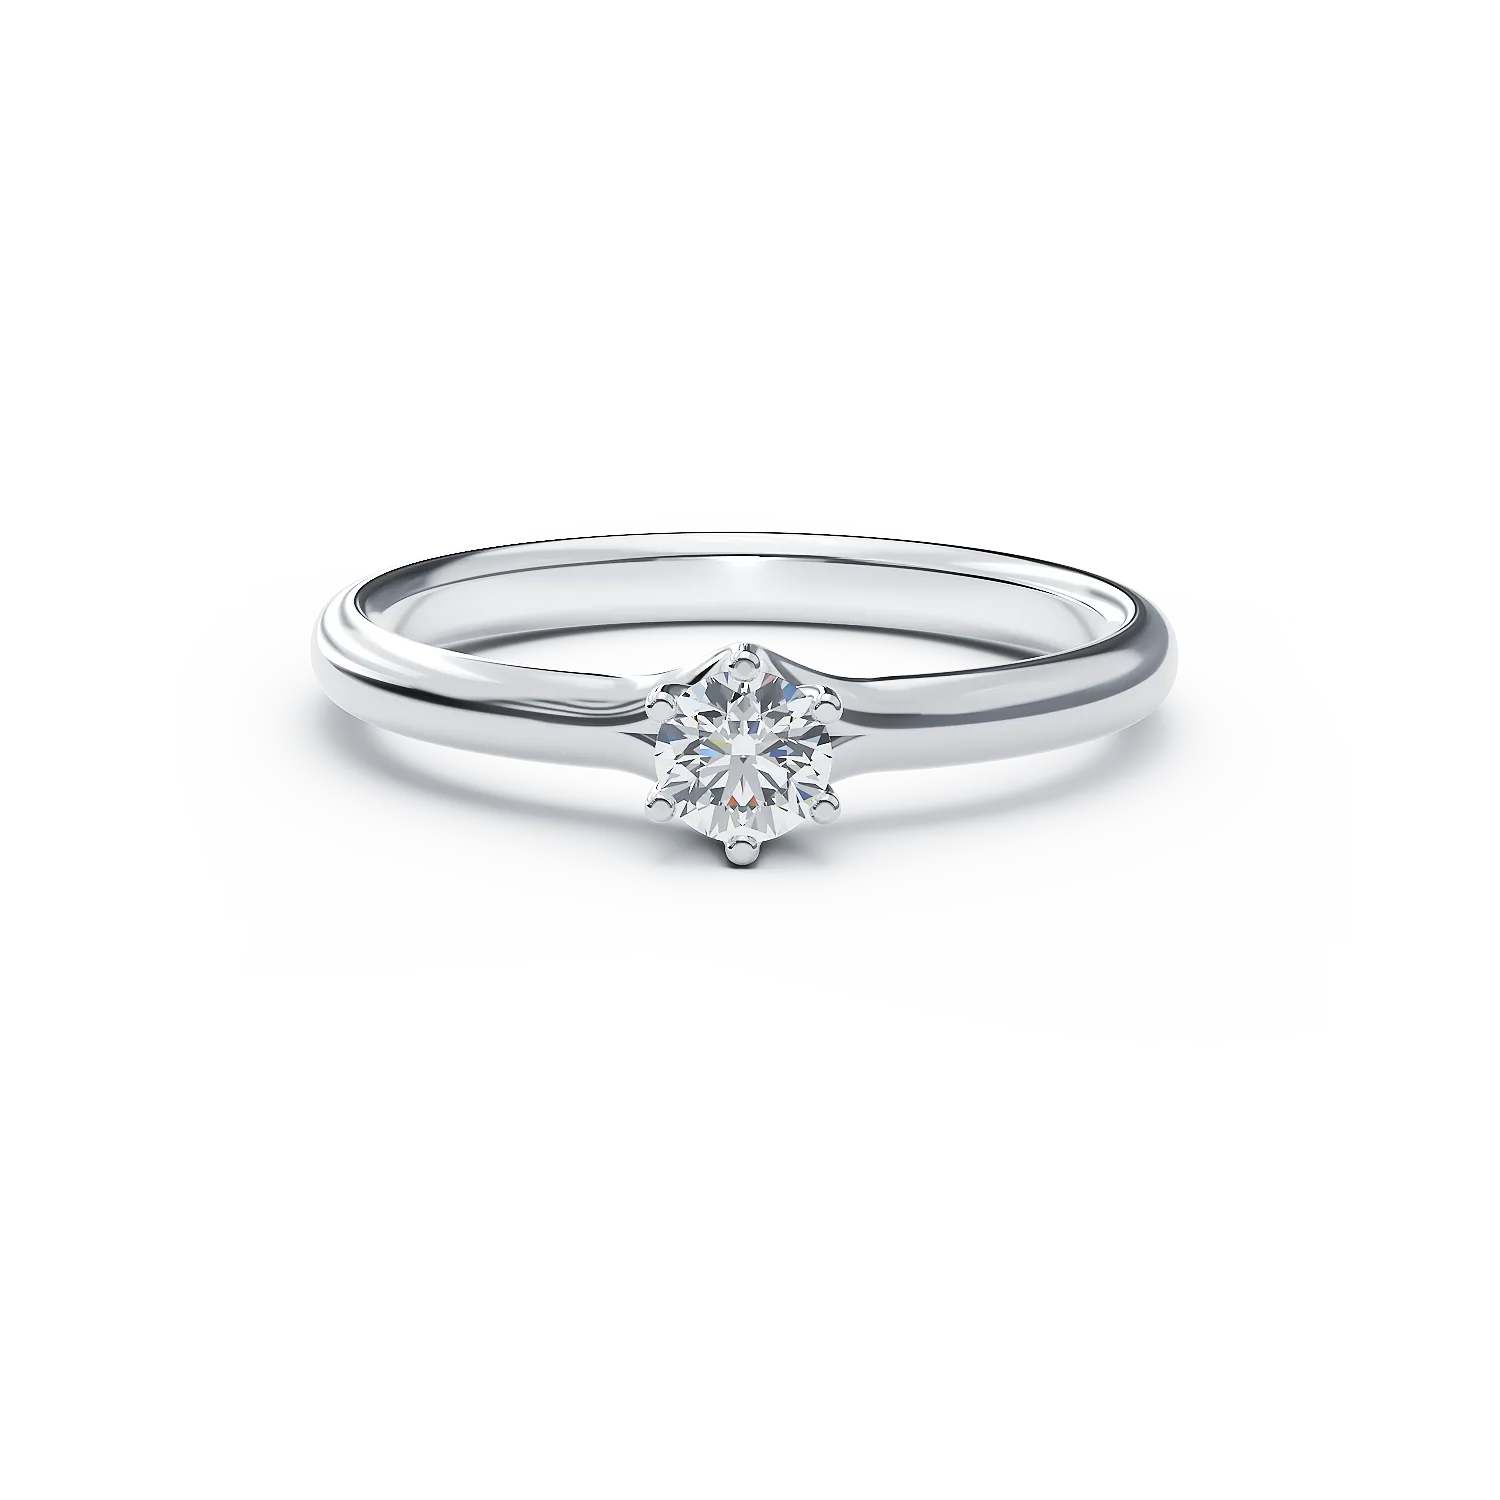 White gold engagement ring with 0.199ct solitaire diamond